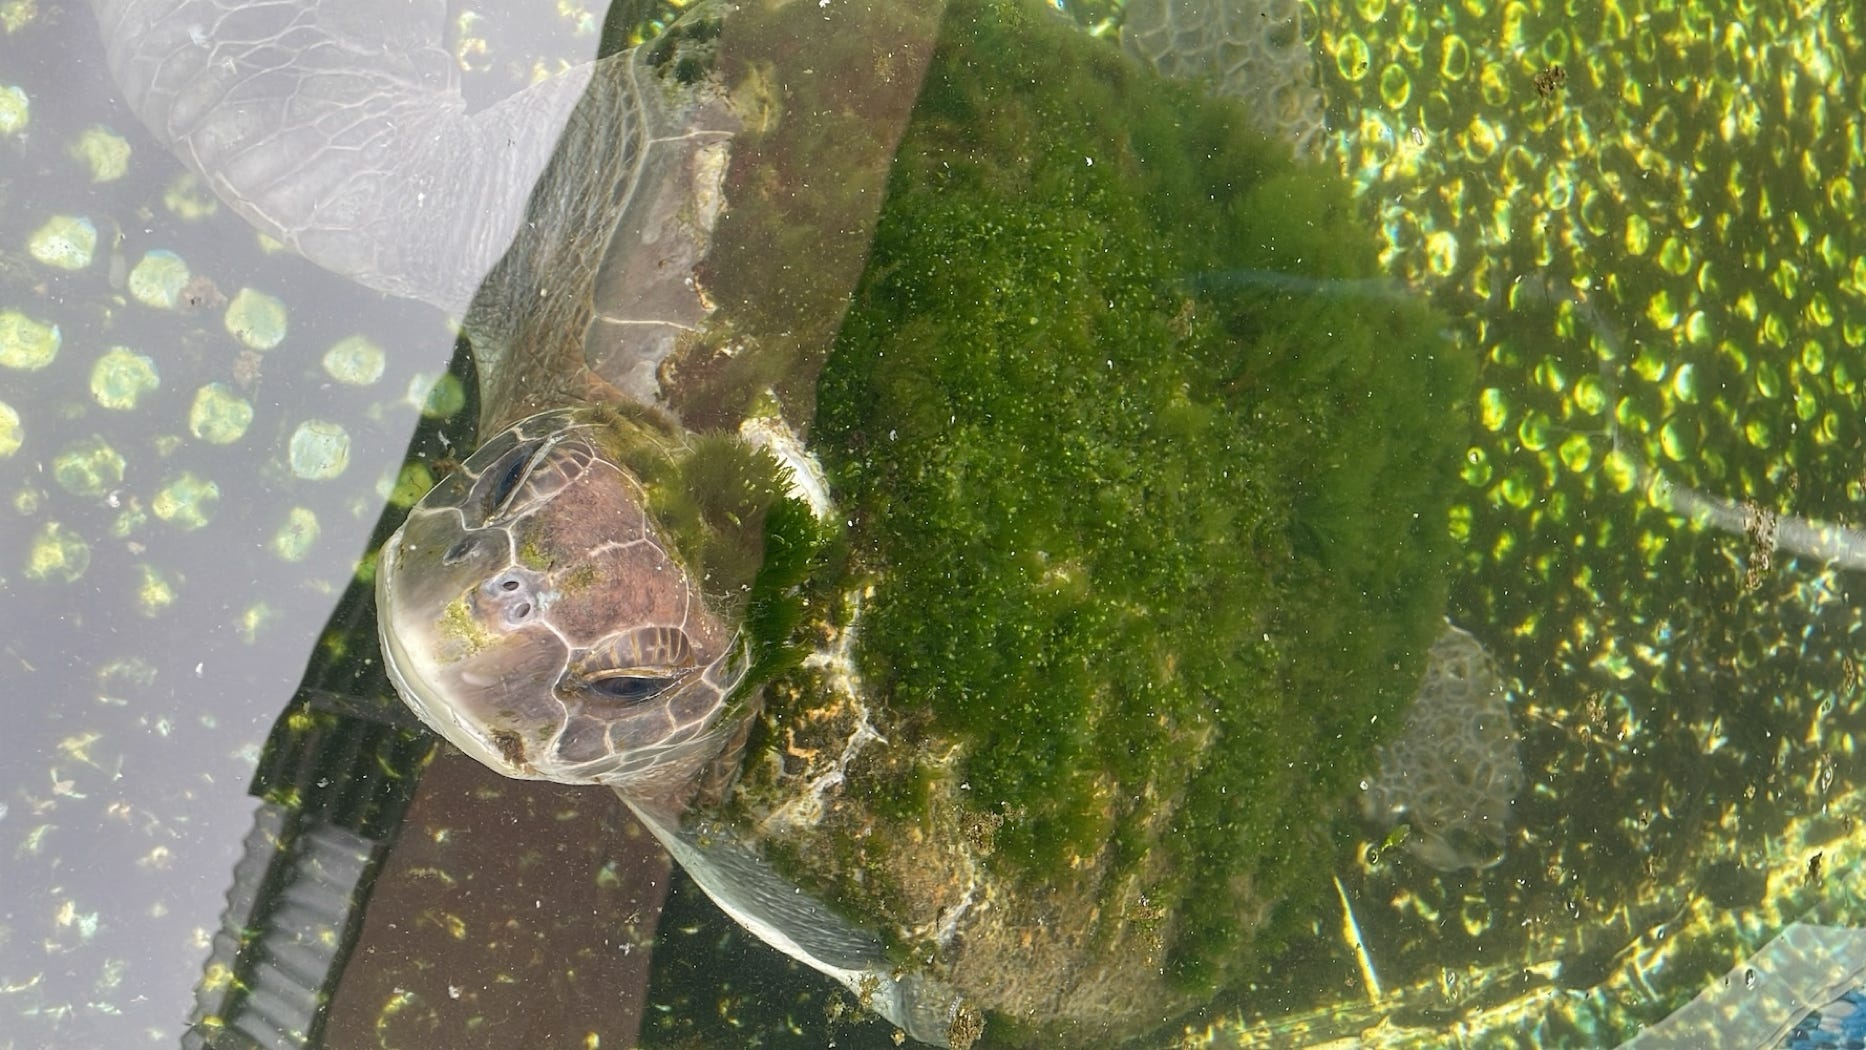 turtle with a mossy back in pool of water